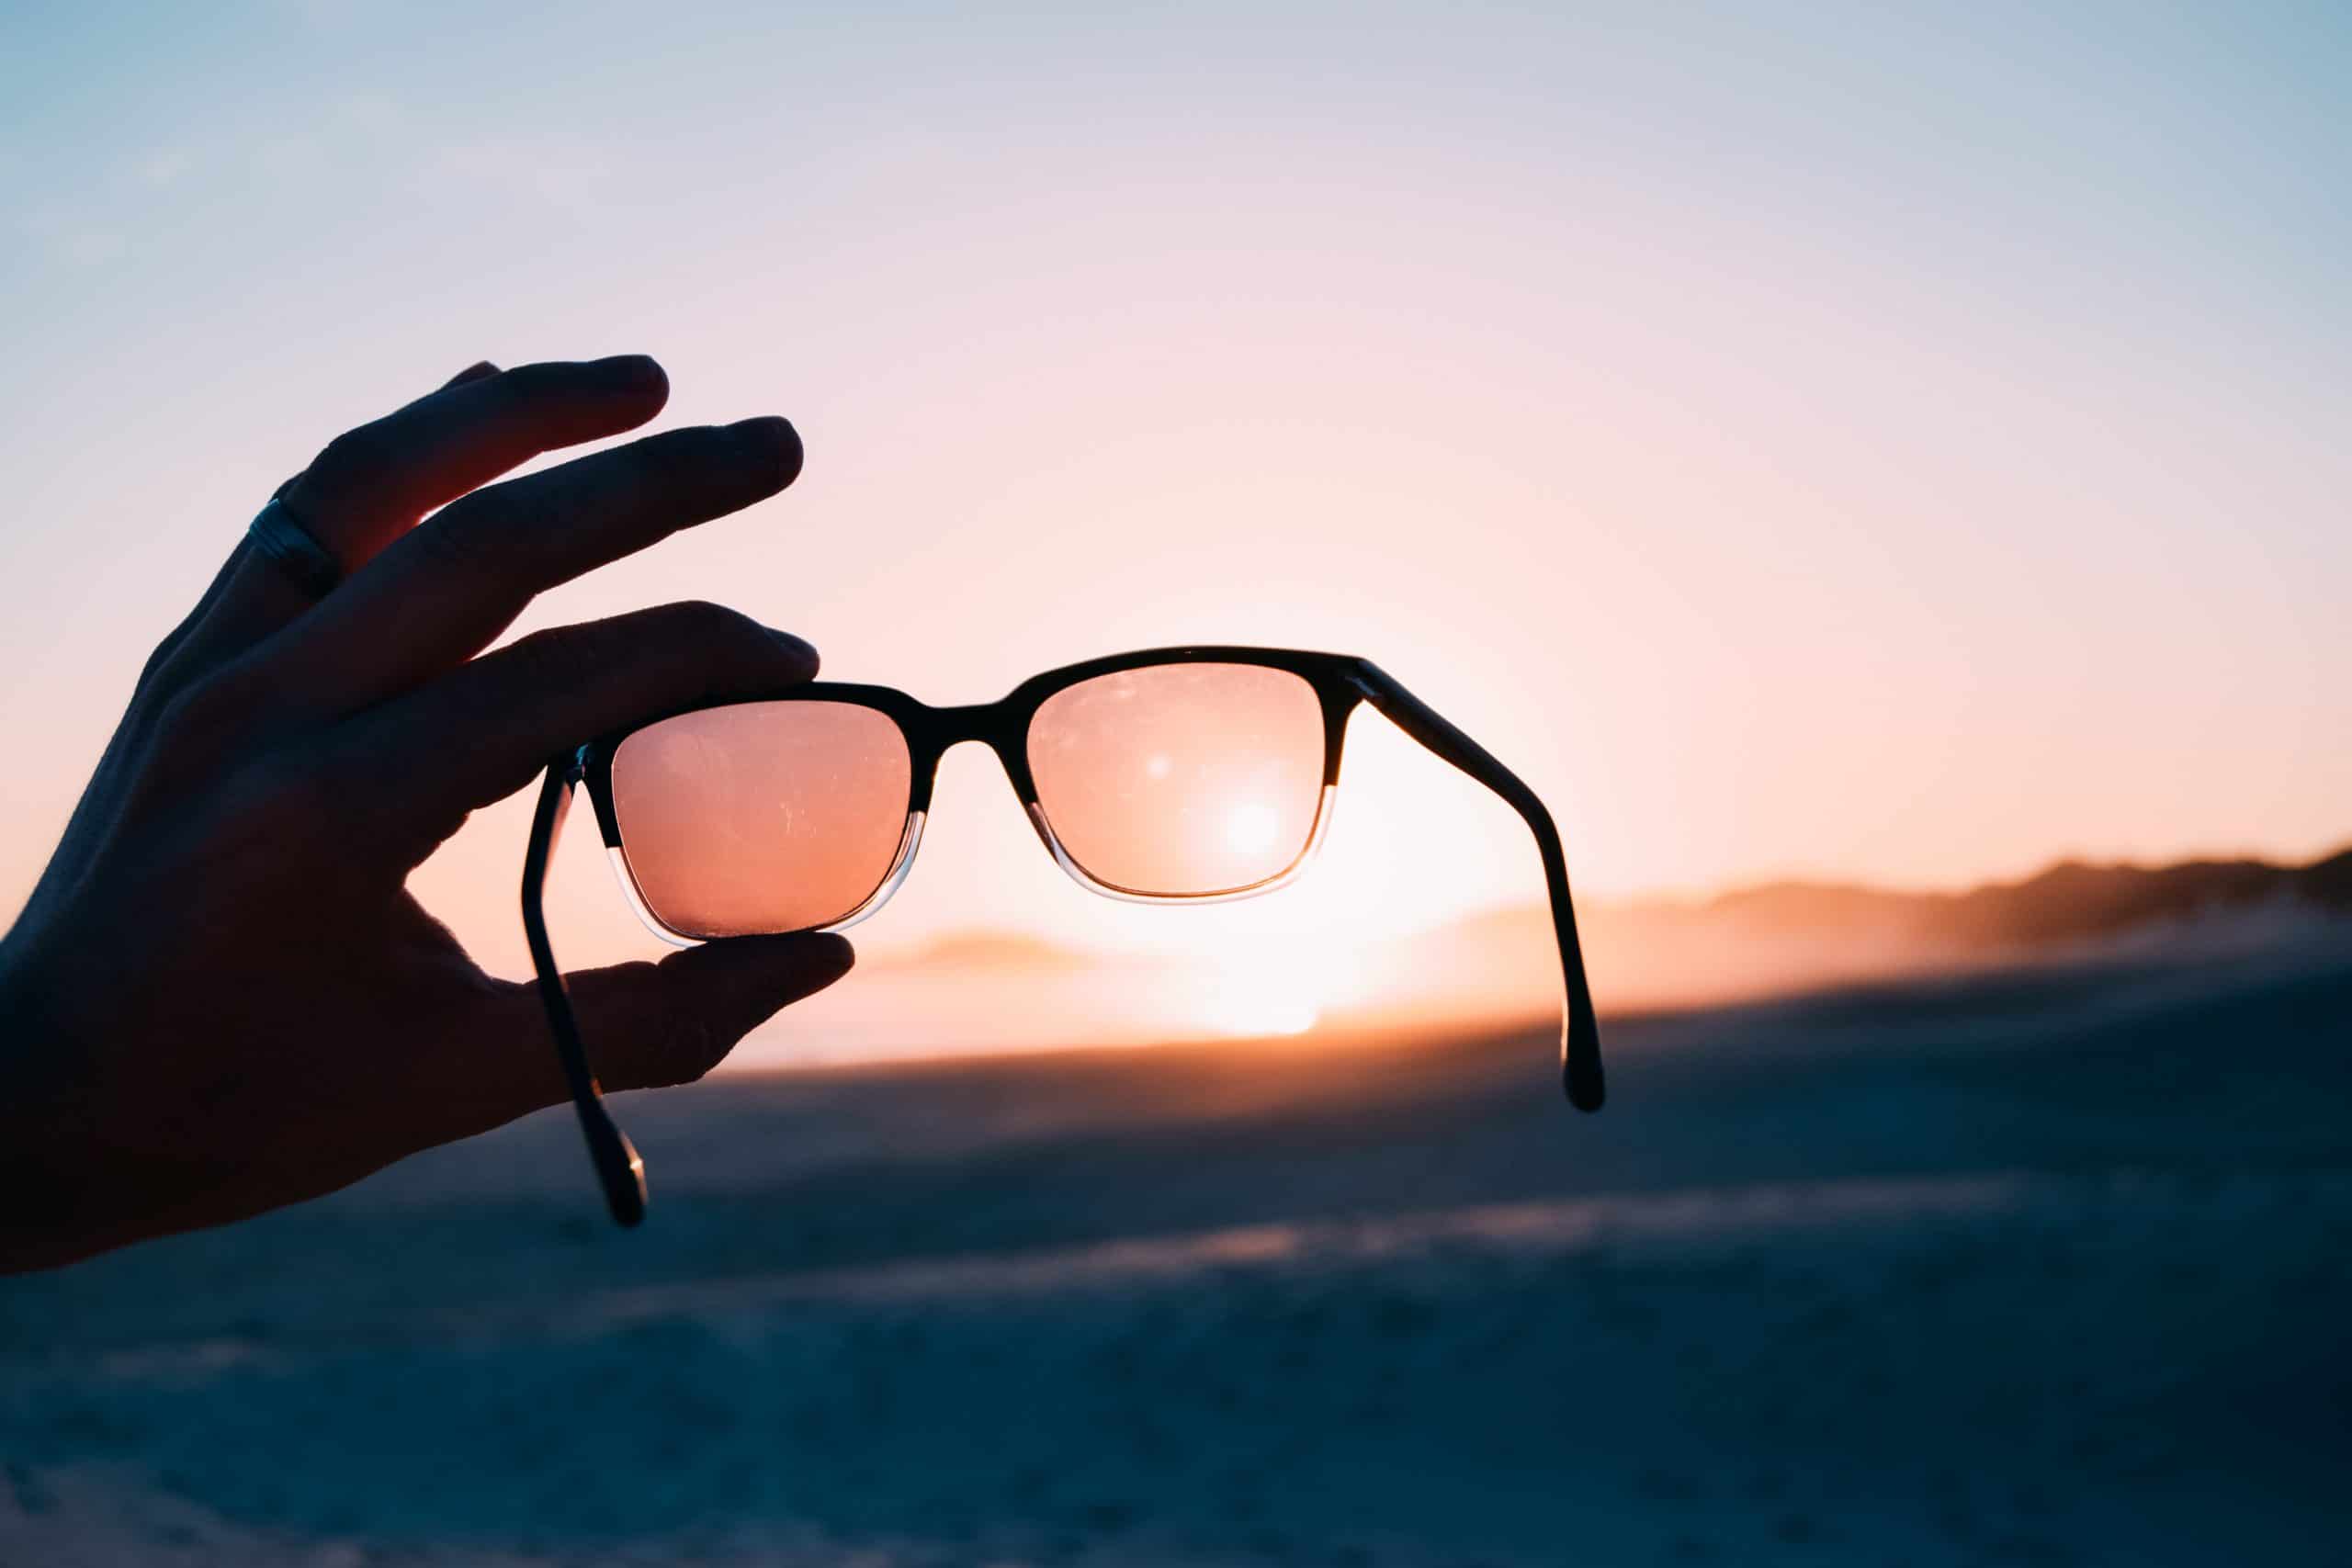 Know how to protect your eyes from the sun with sunglasses